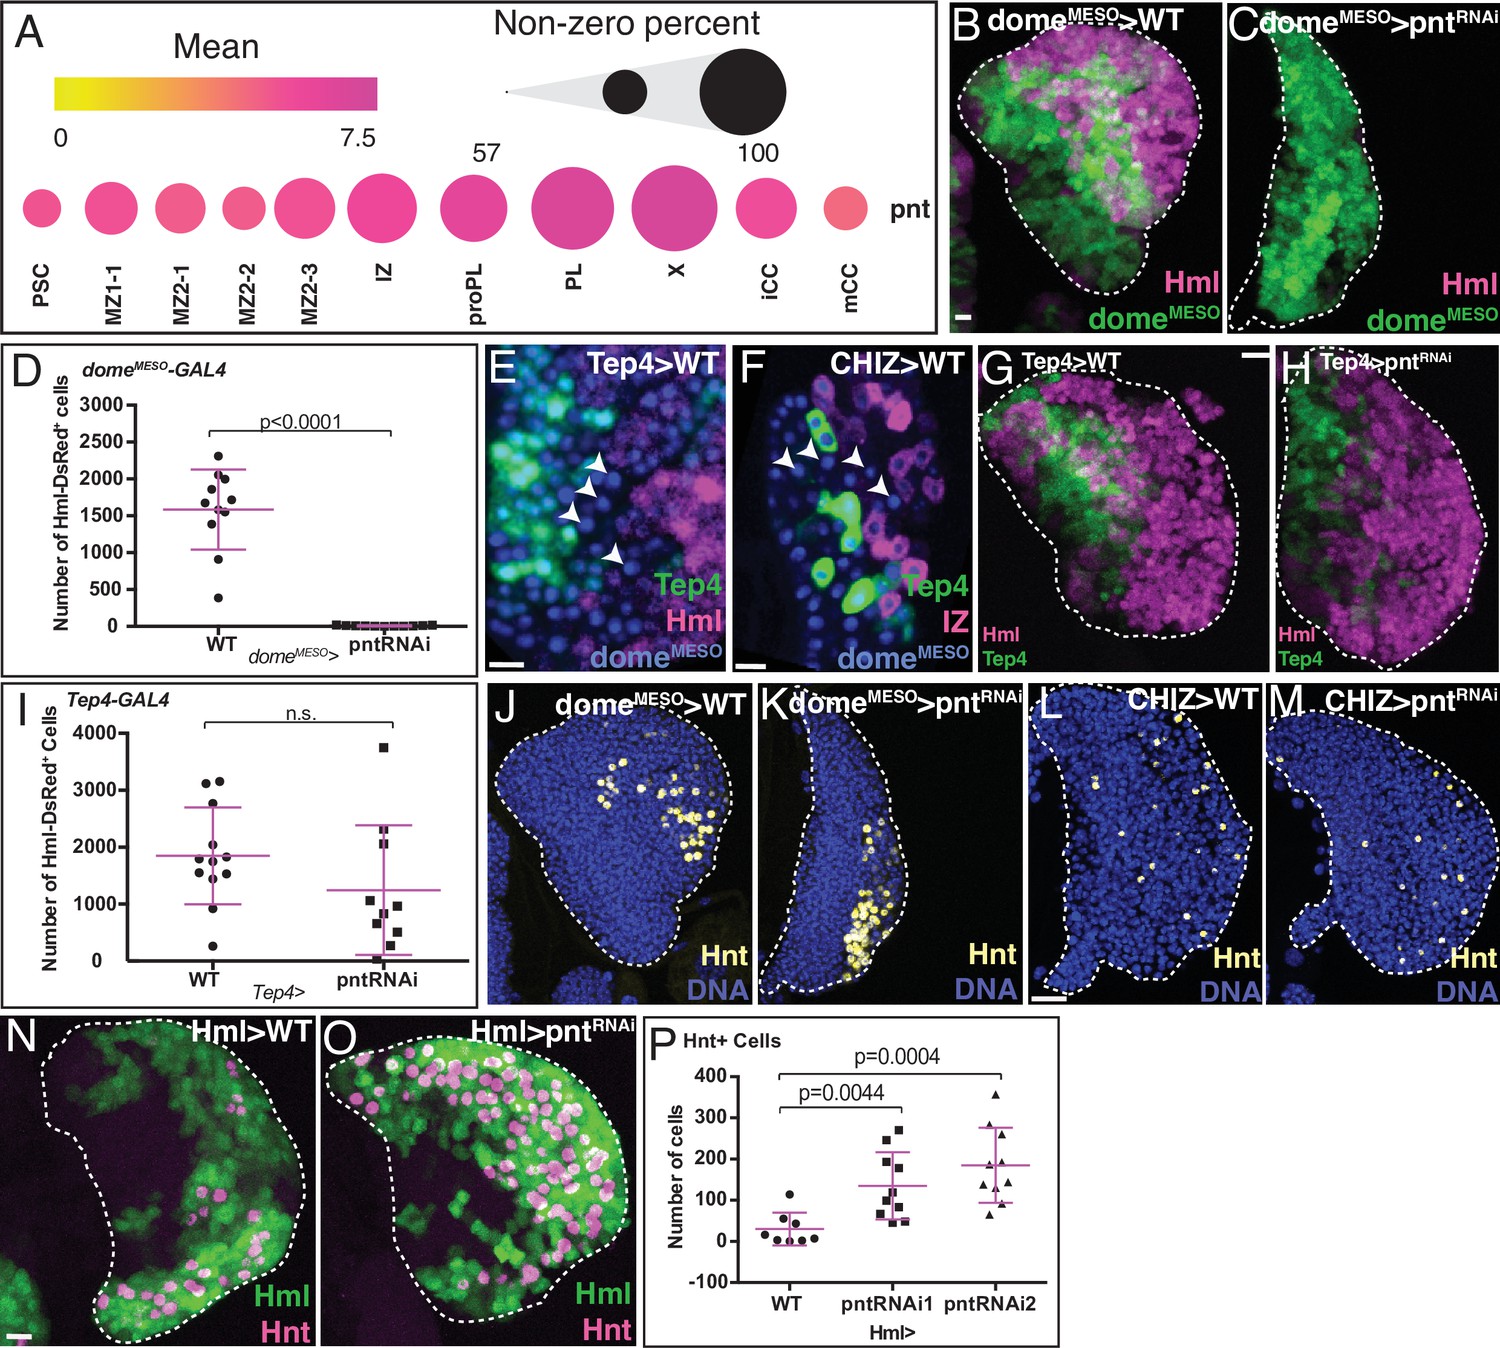 Paths and pathways that generate cell-type heterogeneity and